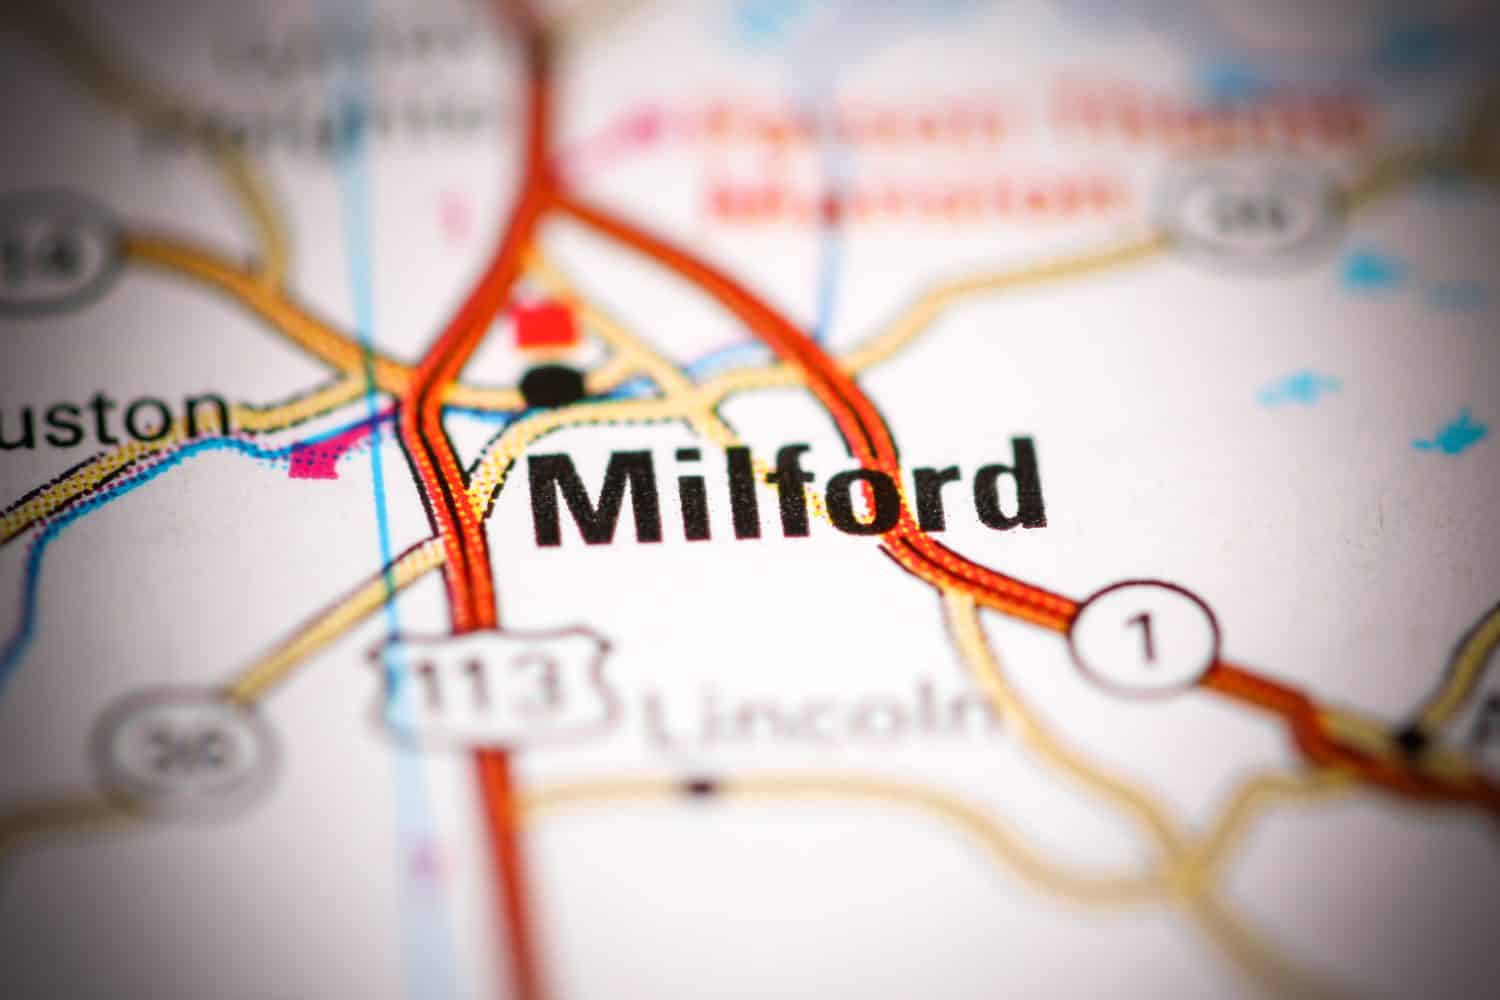 Milford. Delaware. USA on a geography map